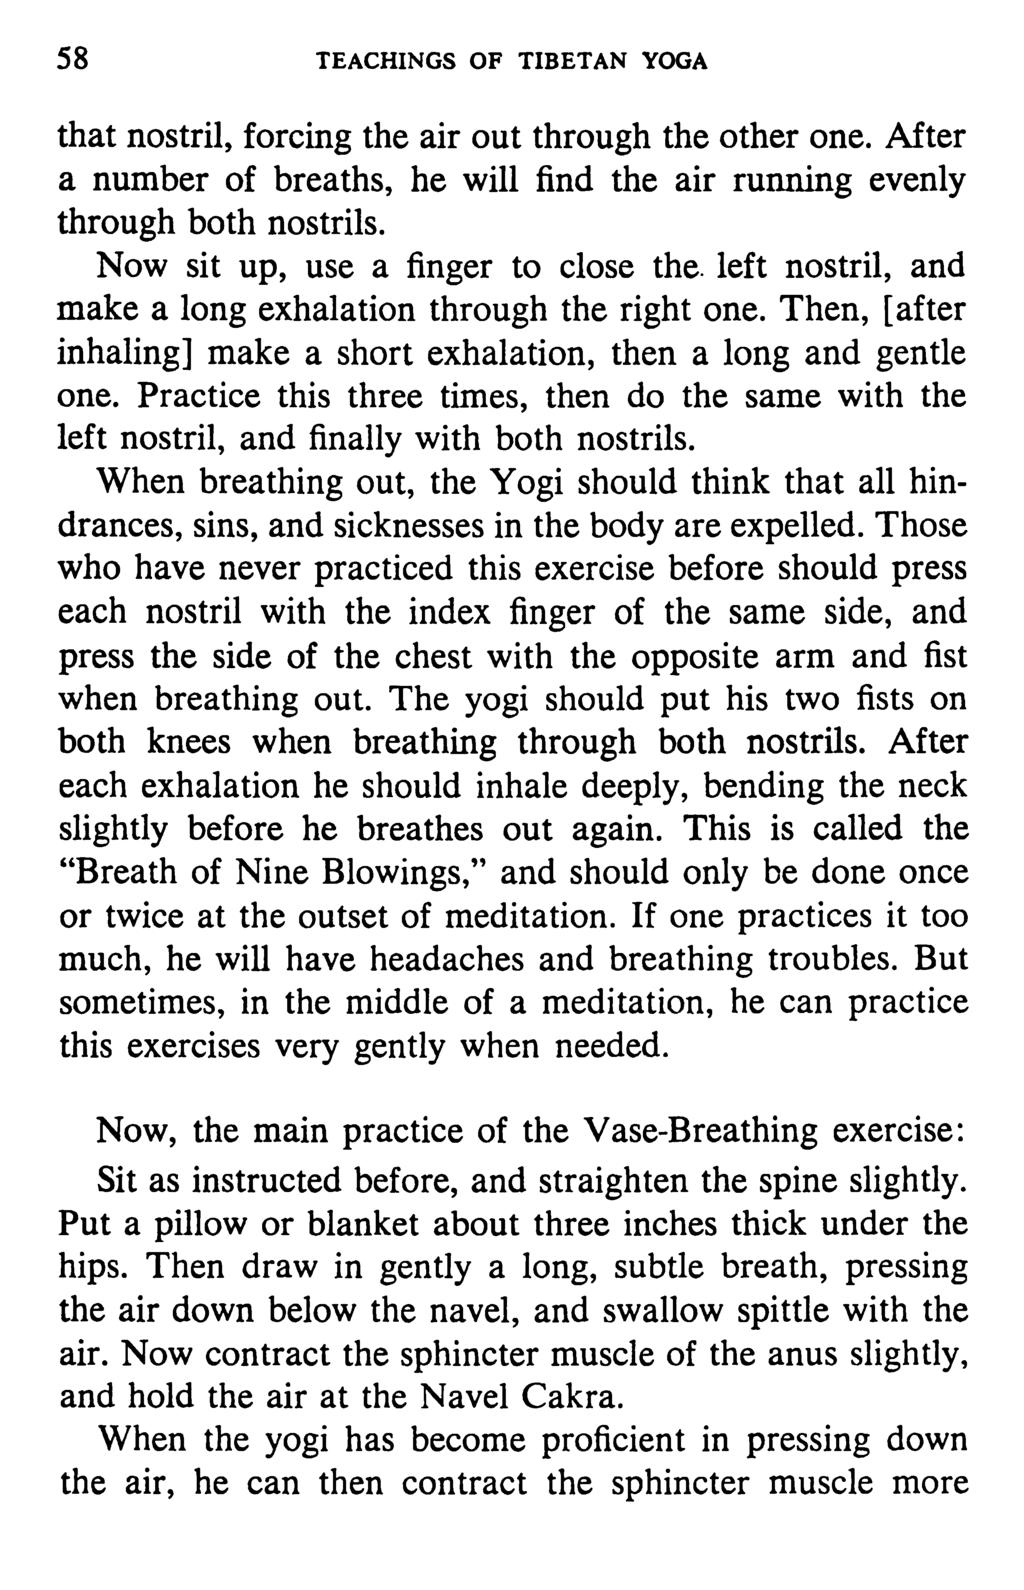 58 TEACHINGS OF TIBETAN YOGA that nostril, forcing the air out through the other one. After a number of breaths, he will find the air running evenly through both nostrils.